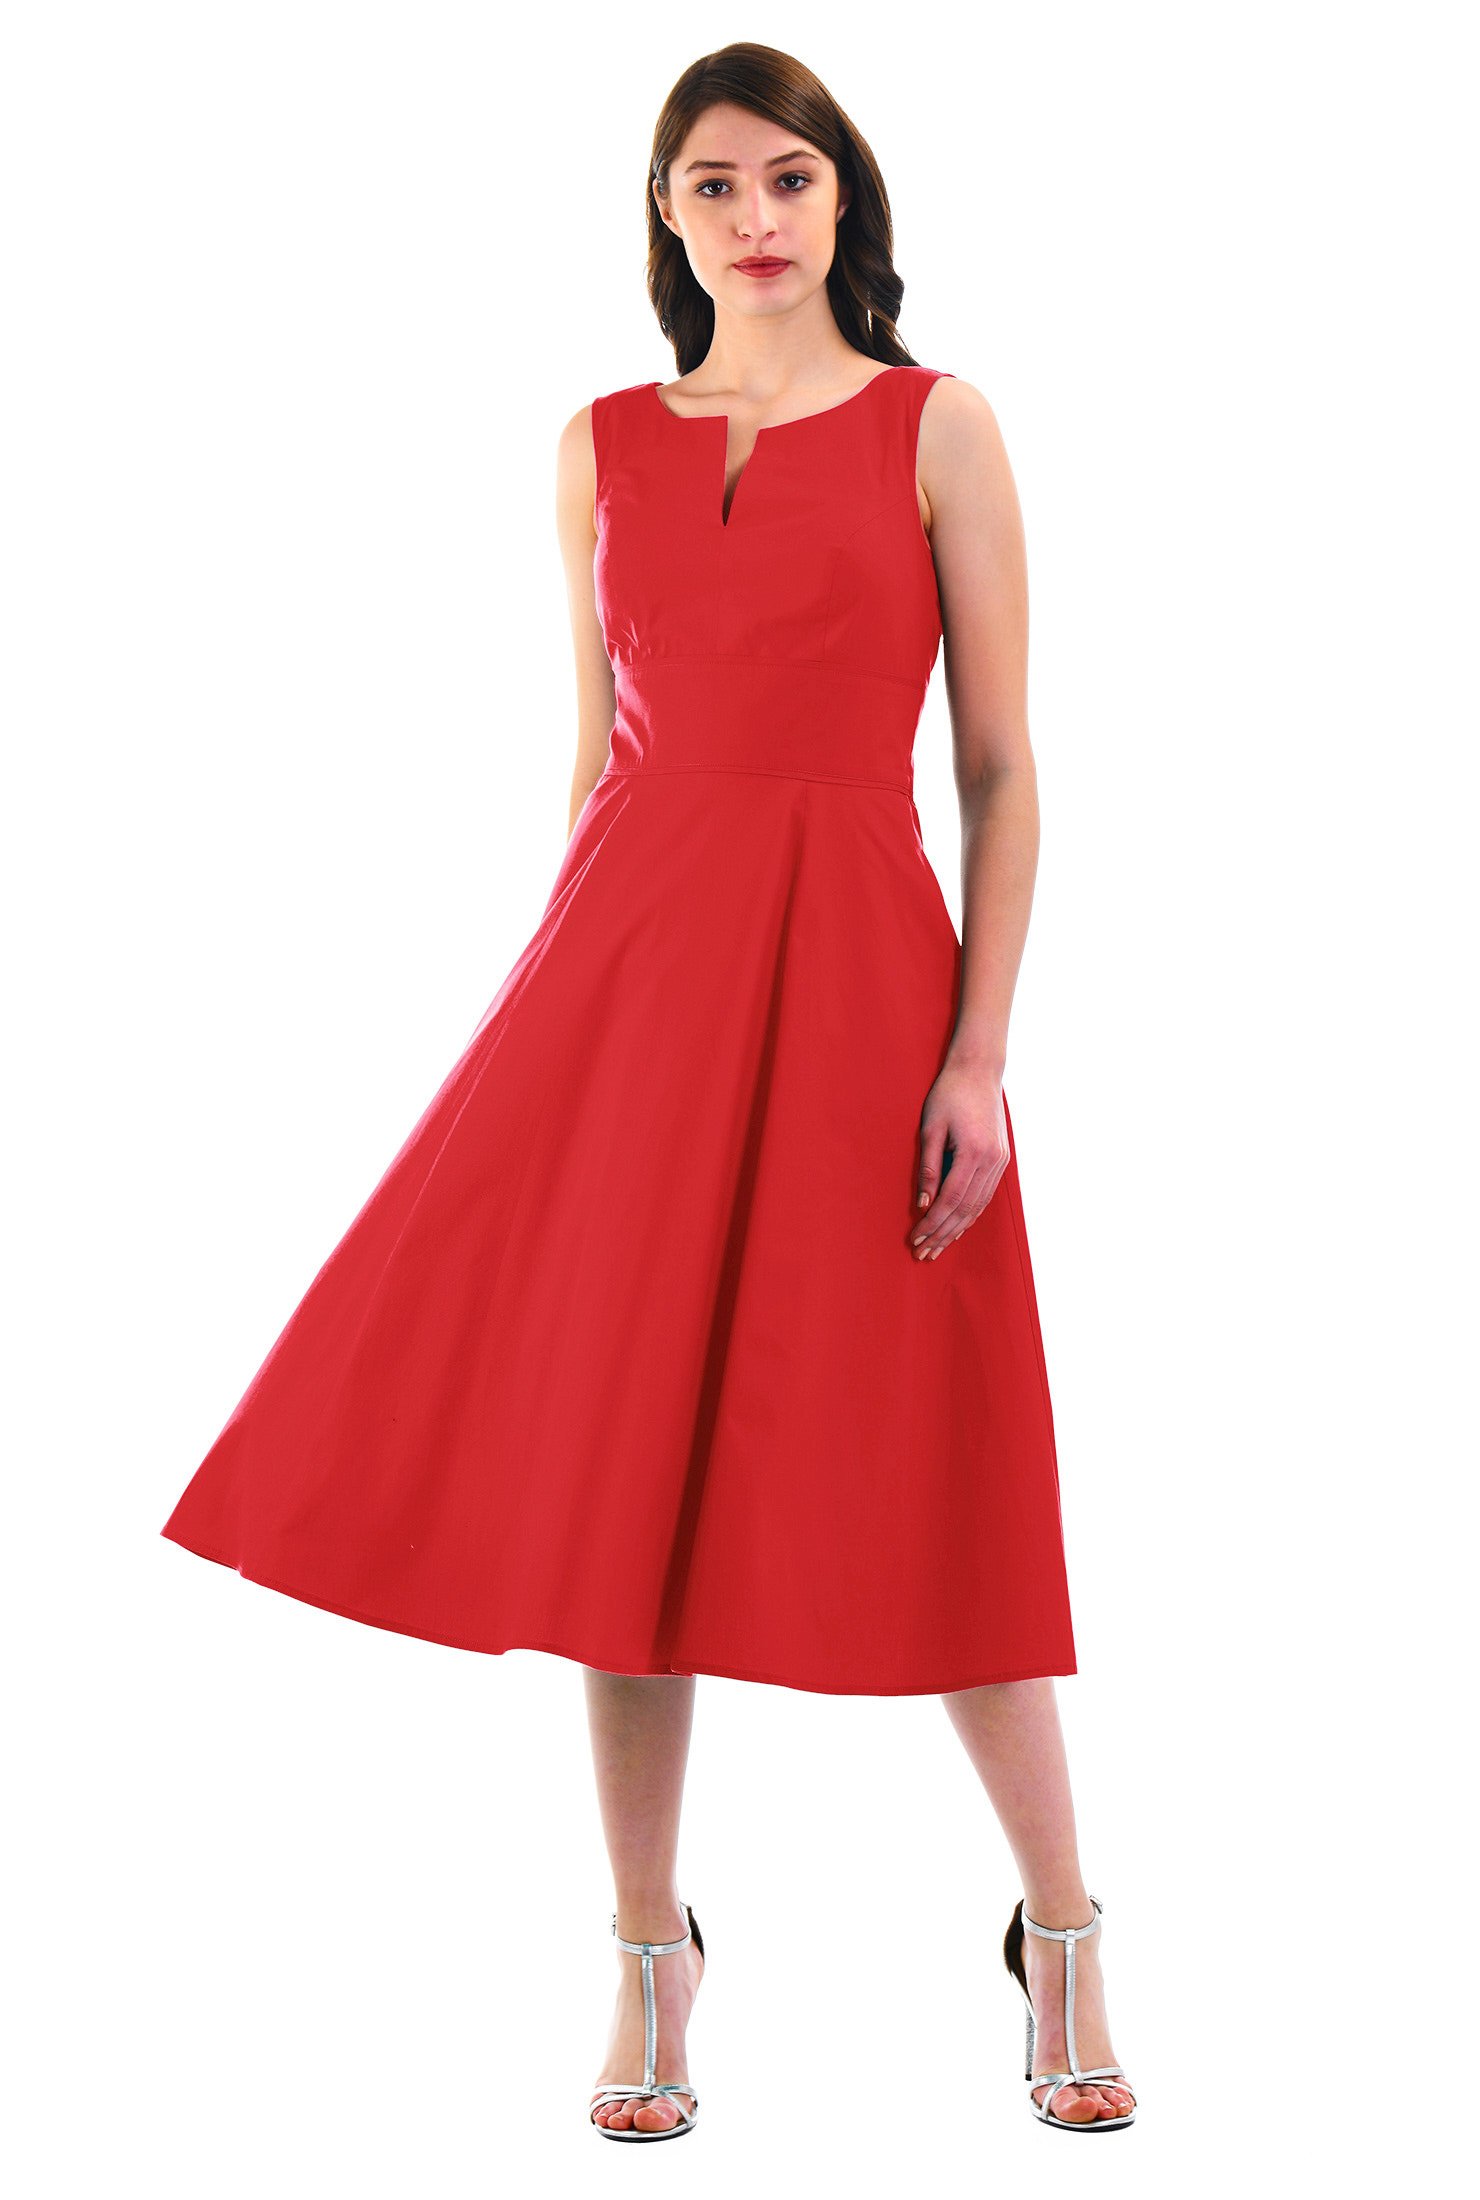 Cotton poplin fit-and-flare dress